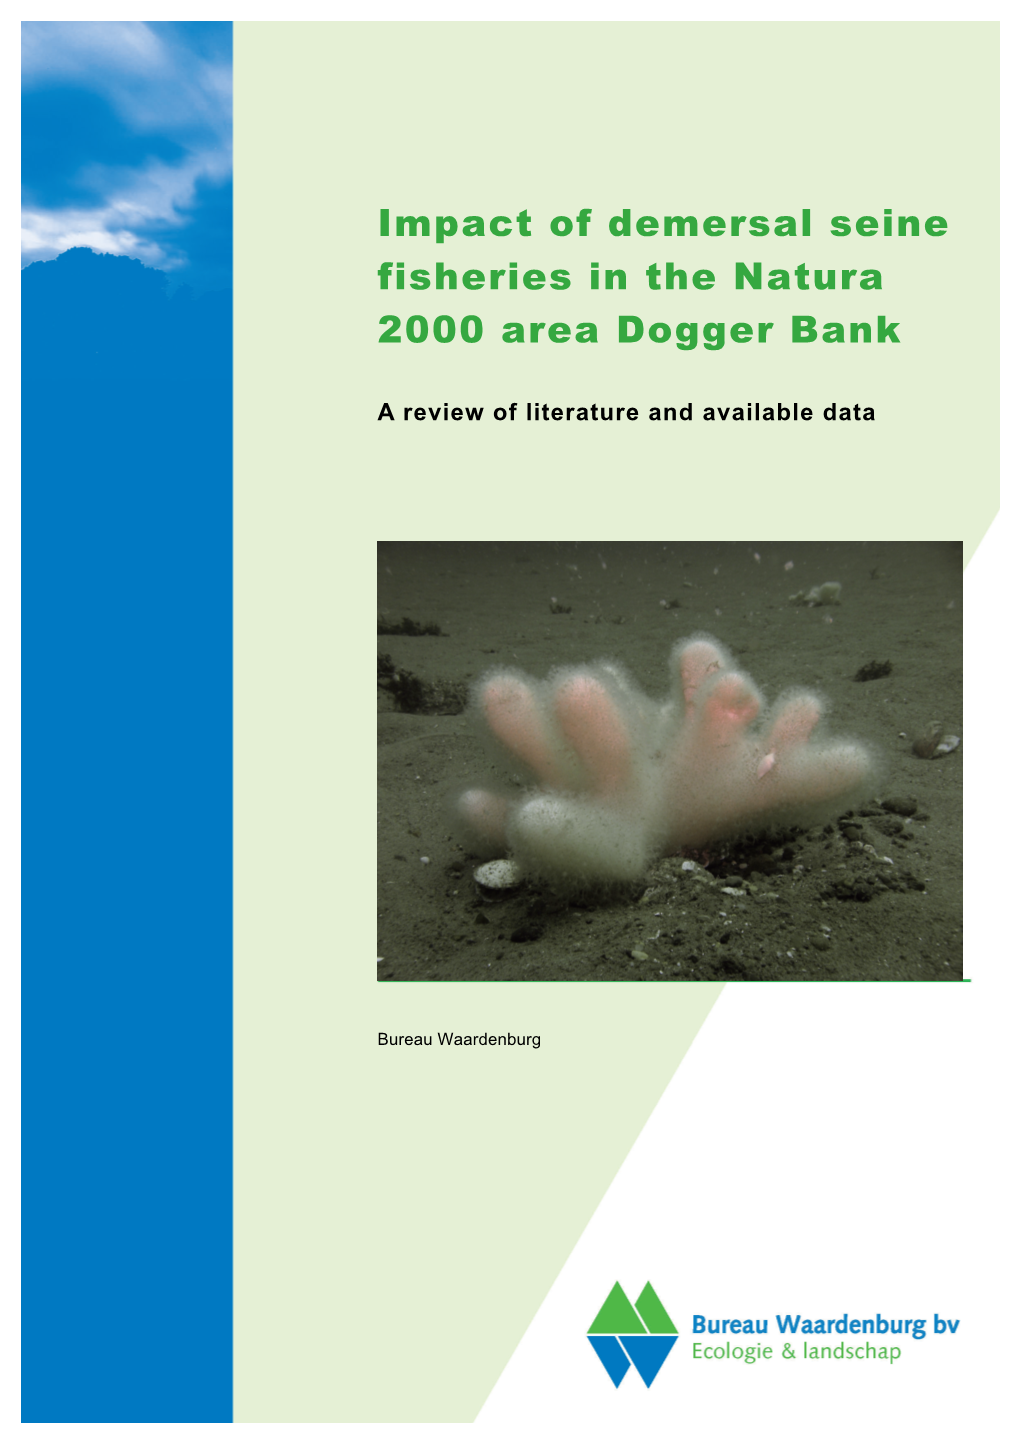 Impact of Demersal Seine Fisheries in the Natura 2000 Area Dogger Bank